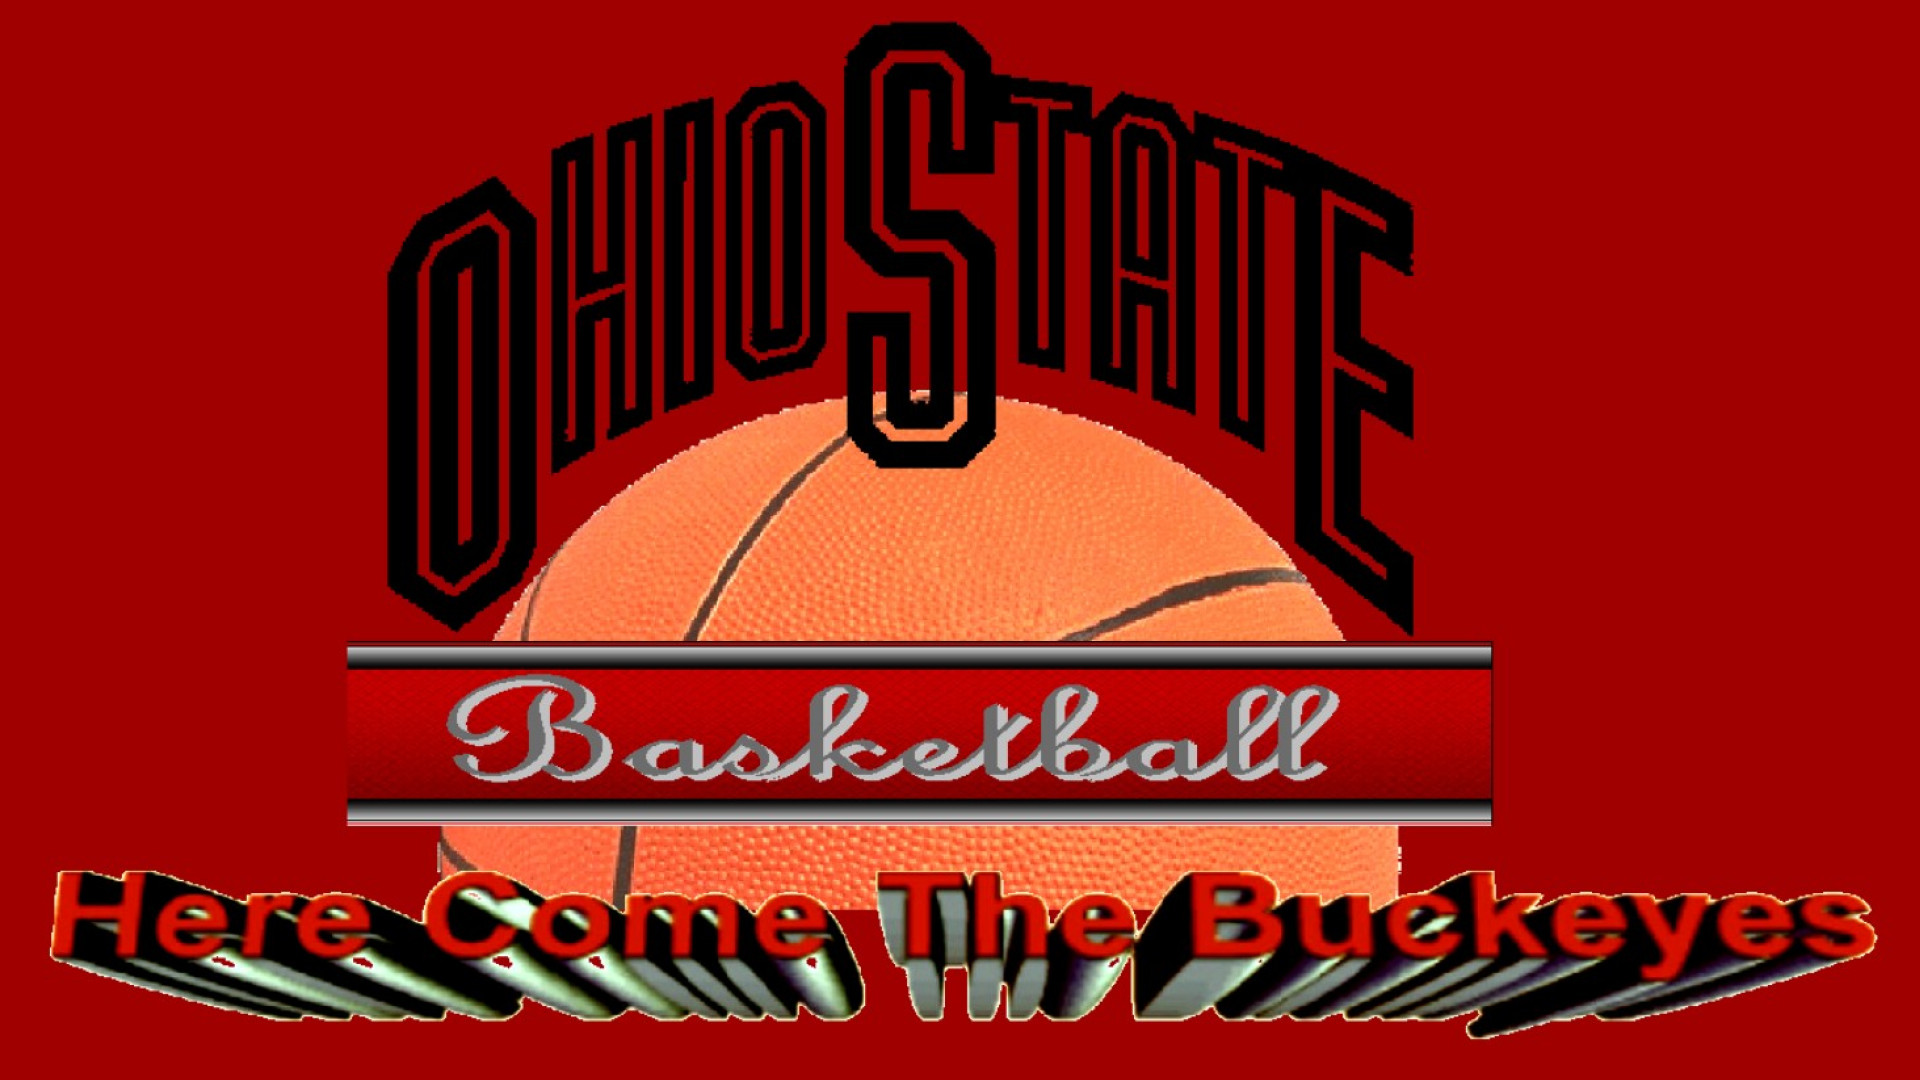 1920x1080 Ohio State University Basketball images OHIO STATE BASKETBALL HERE COME THE  BUCKEYES HD wallpaper and background photos